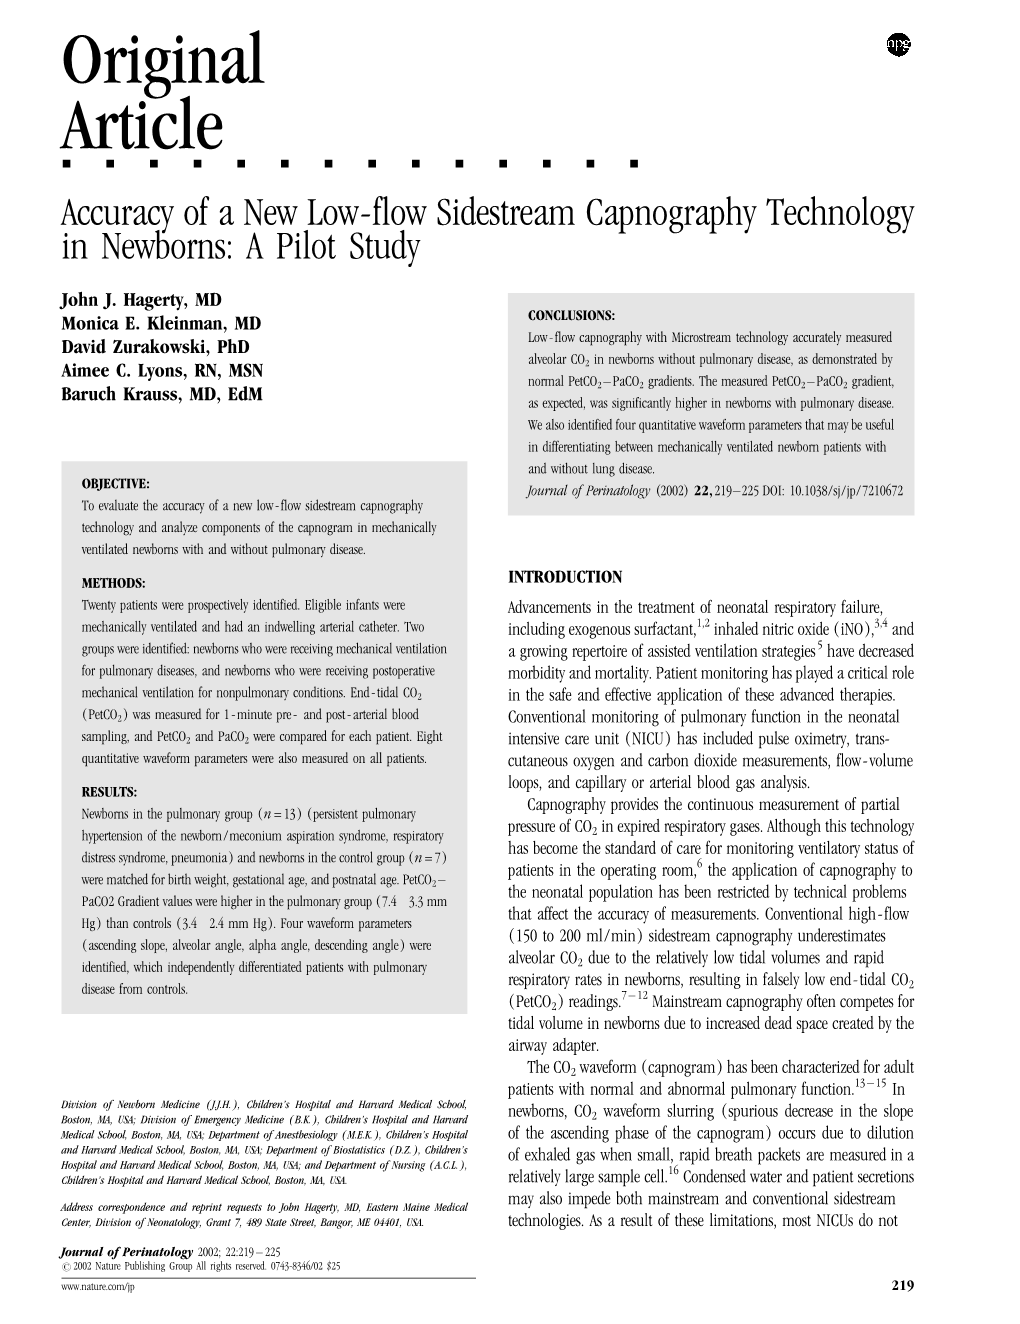 Accuracy of a New Low-Flow Sidestream Capnography Technology in Newborns: a Pilot Study